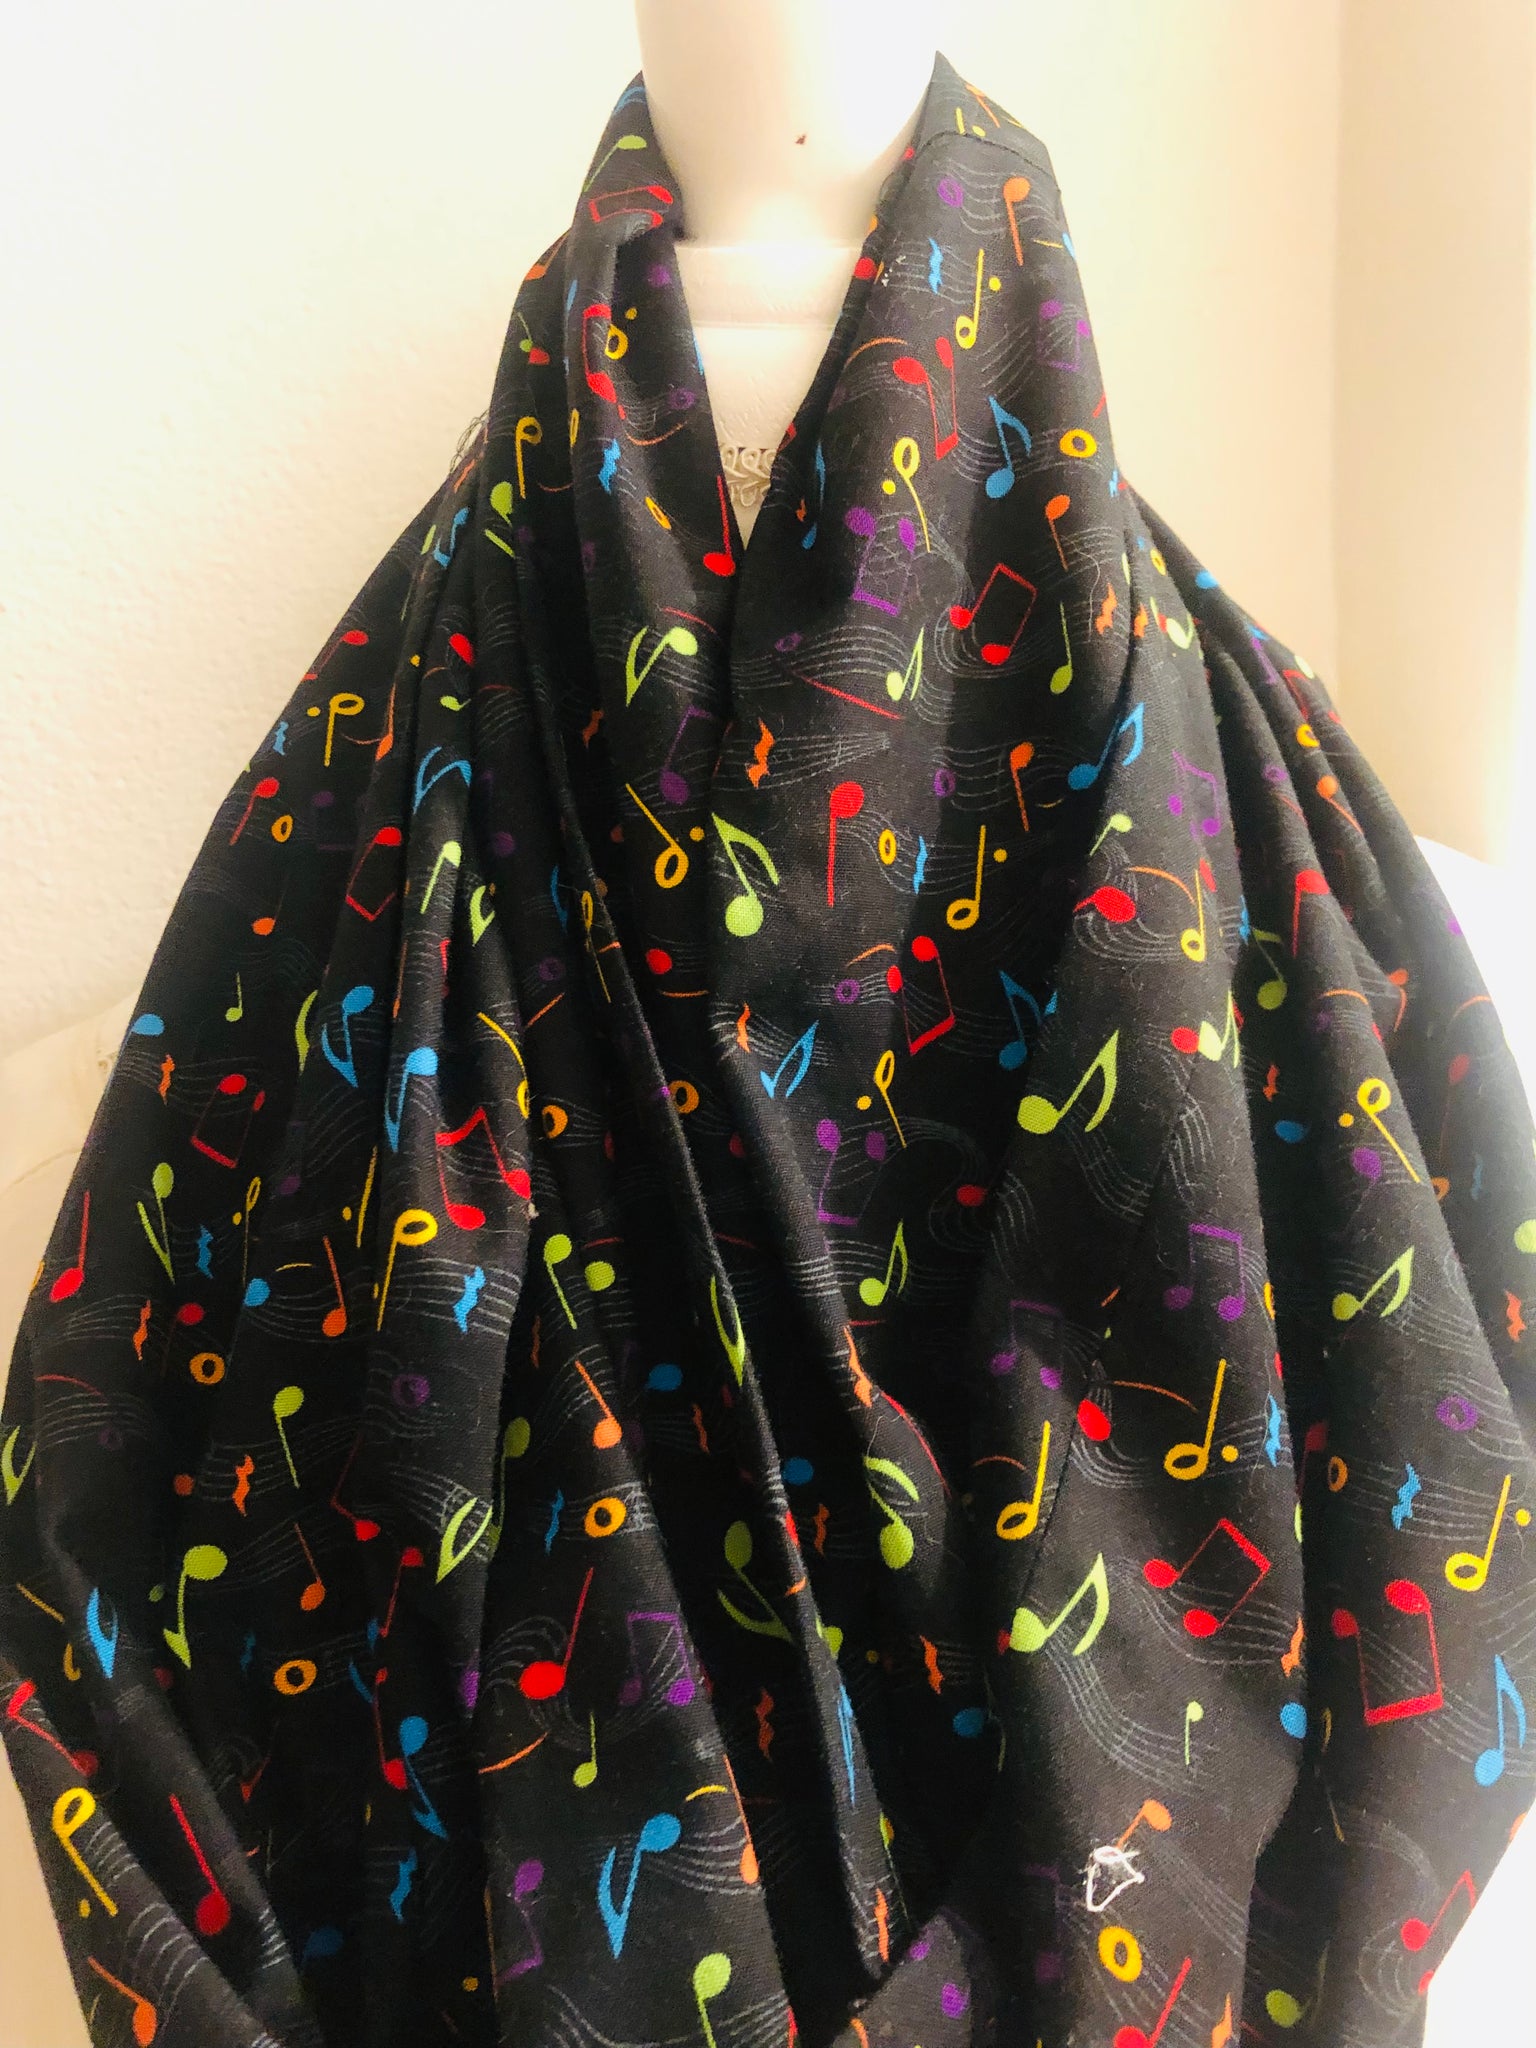 Black with Brightly Colored Musical Notes